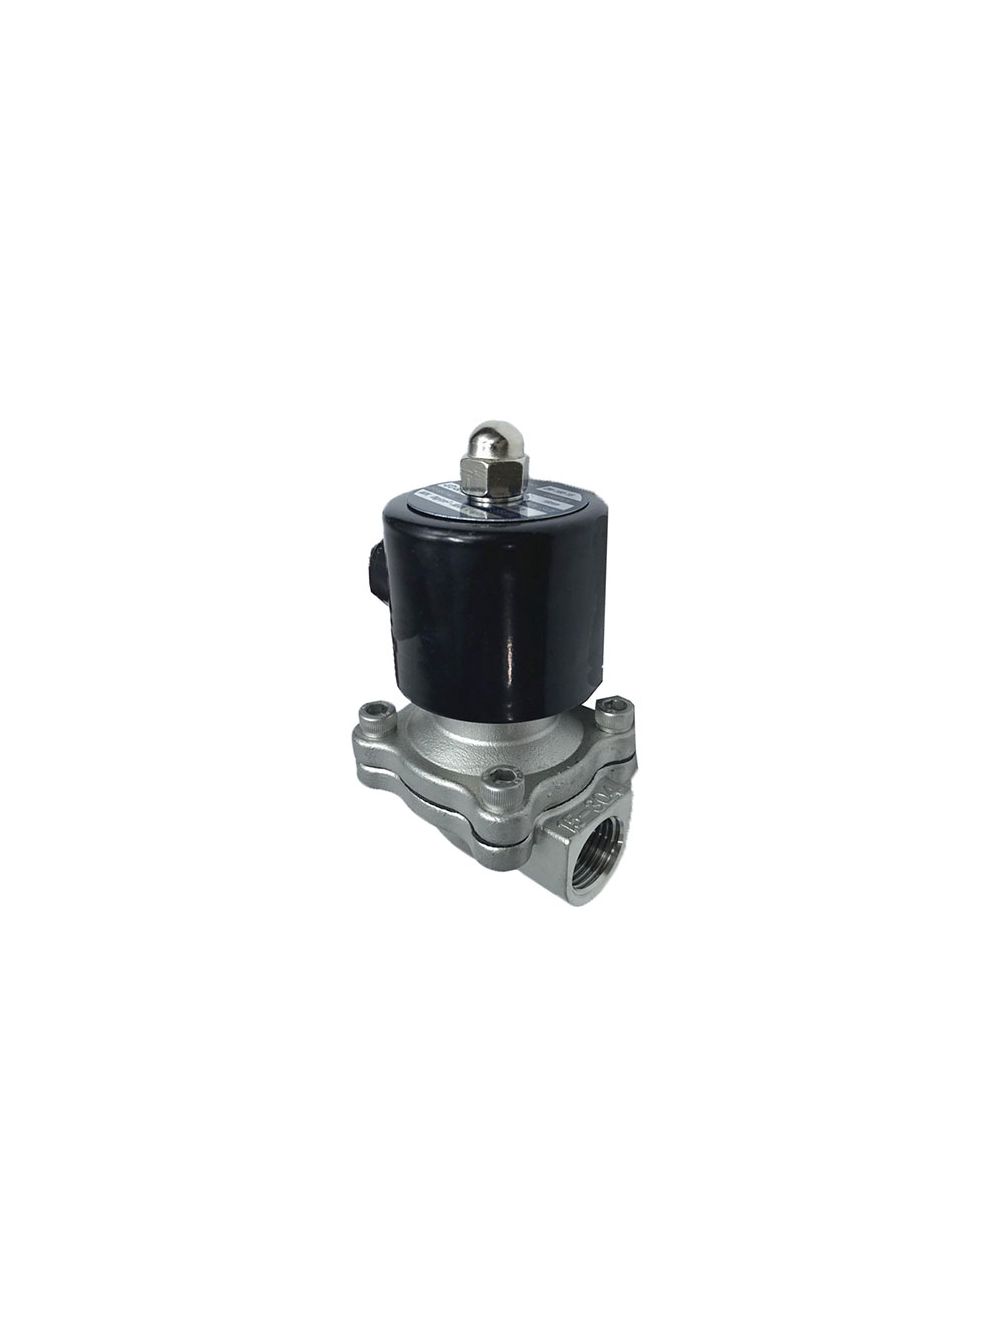 New In stock for sale, UNID Solenoid Valve UWS-40